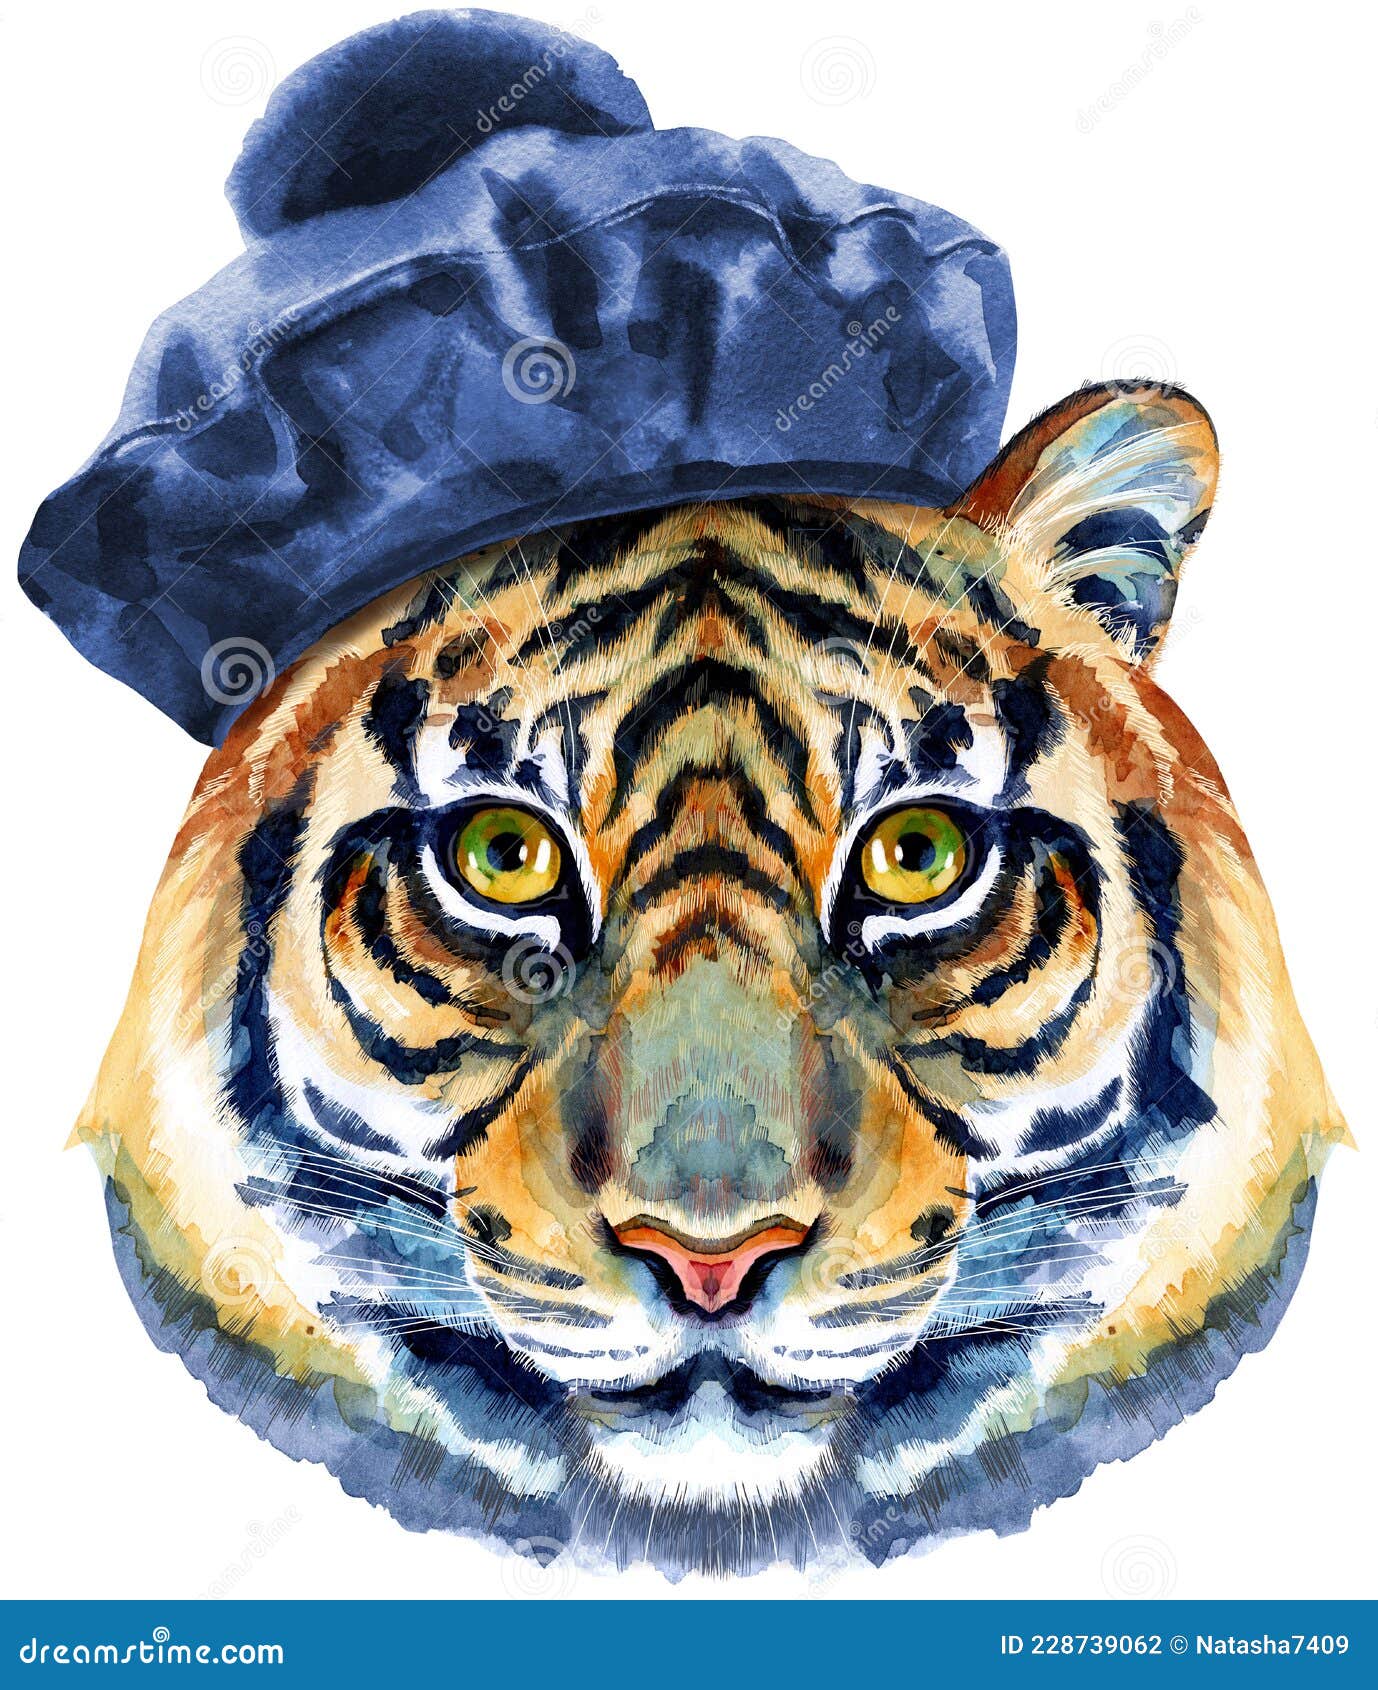 Tiger Black Beret in Pom-pom. Watercolor Illustration Isolated on White Background. Stock Photo - Image head, animal: 228739062